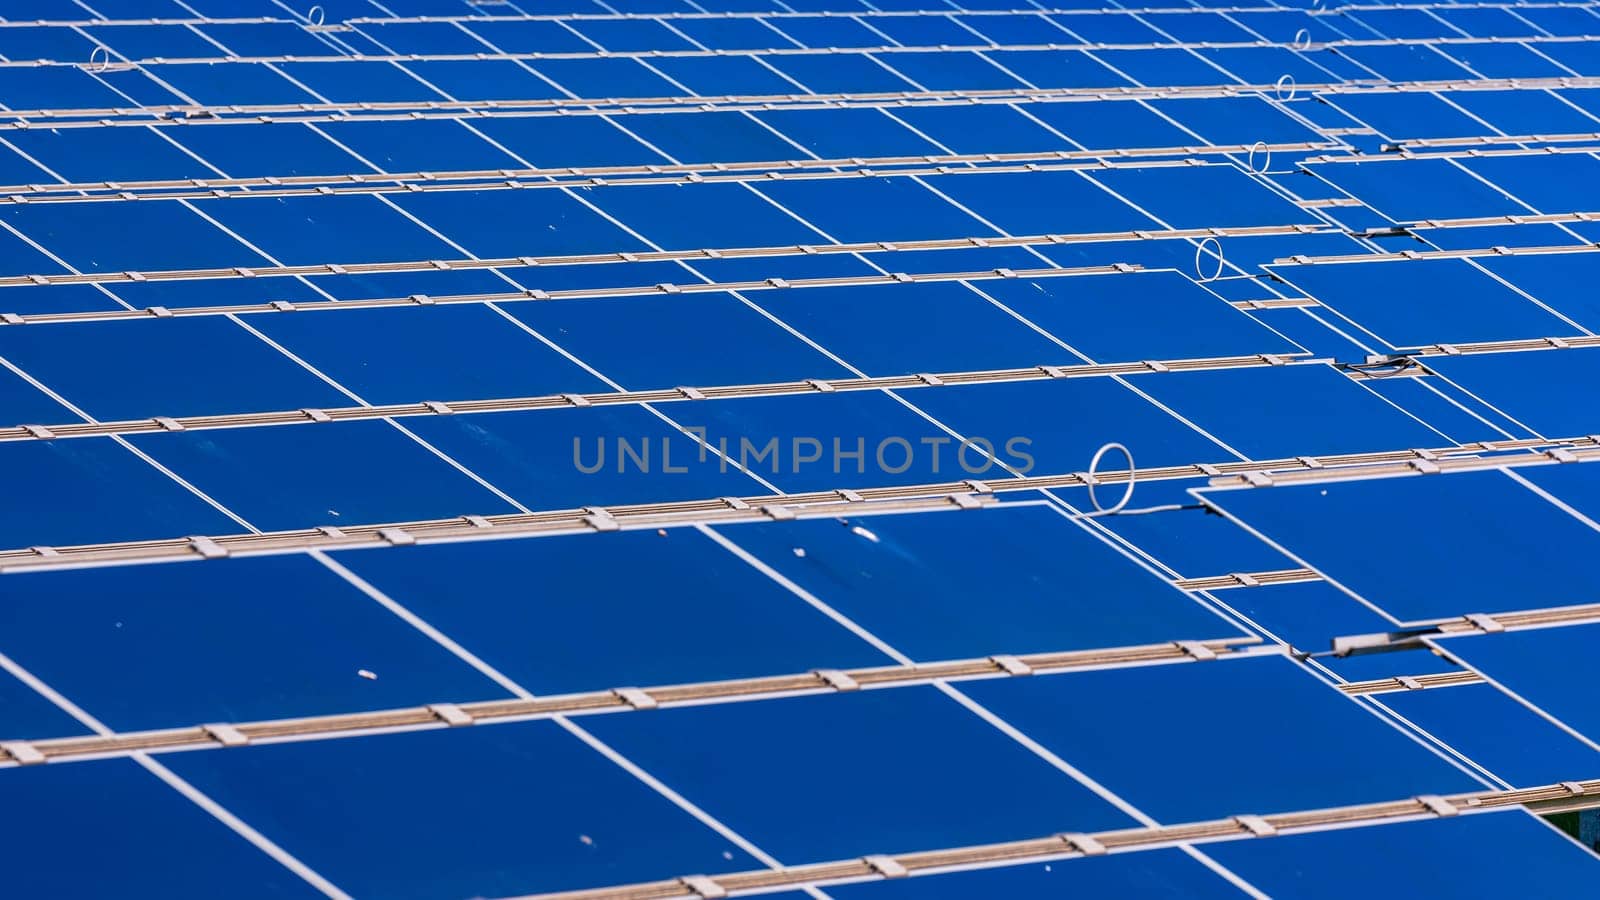 Solar panels from a solar field to generate renewable energy with sunshine up to the horizon